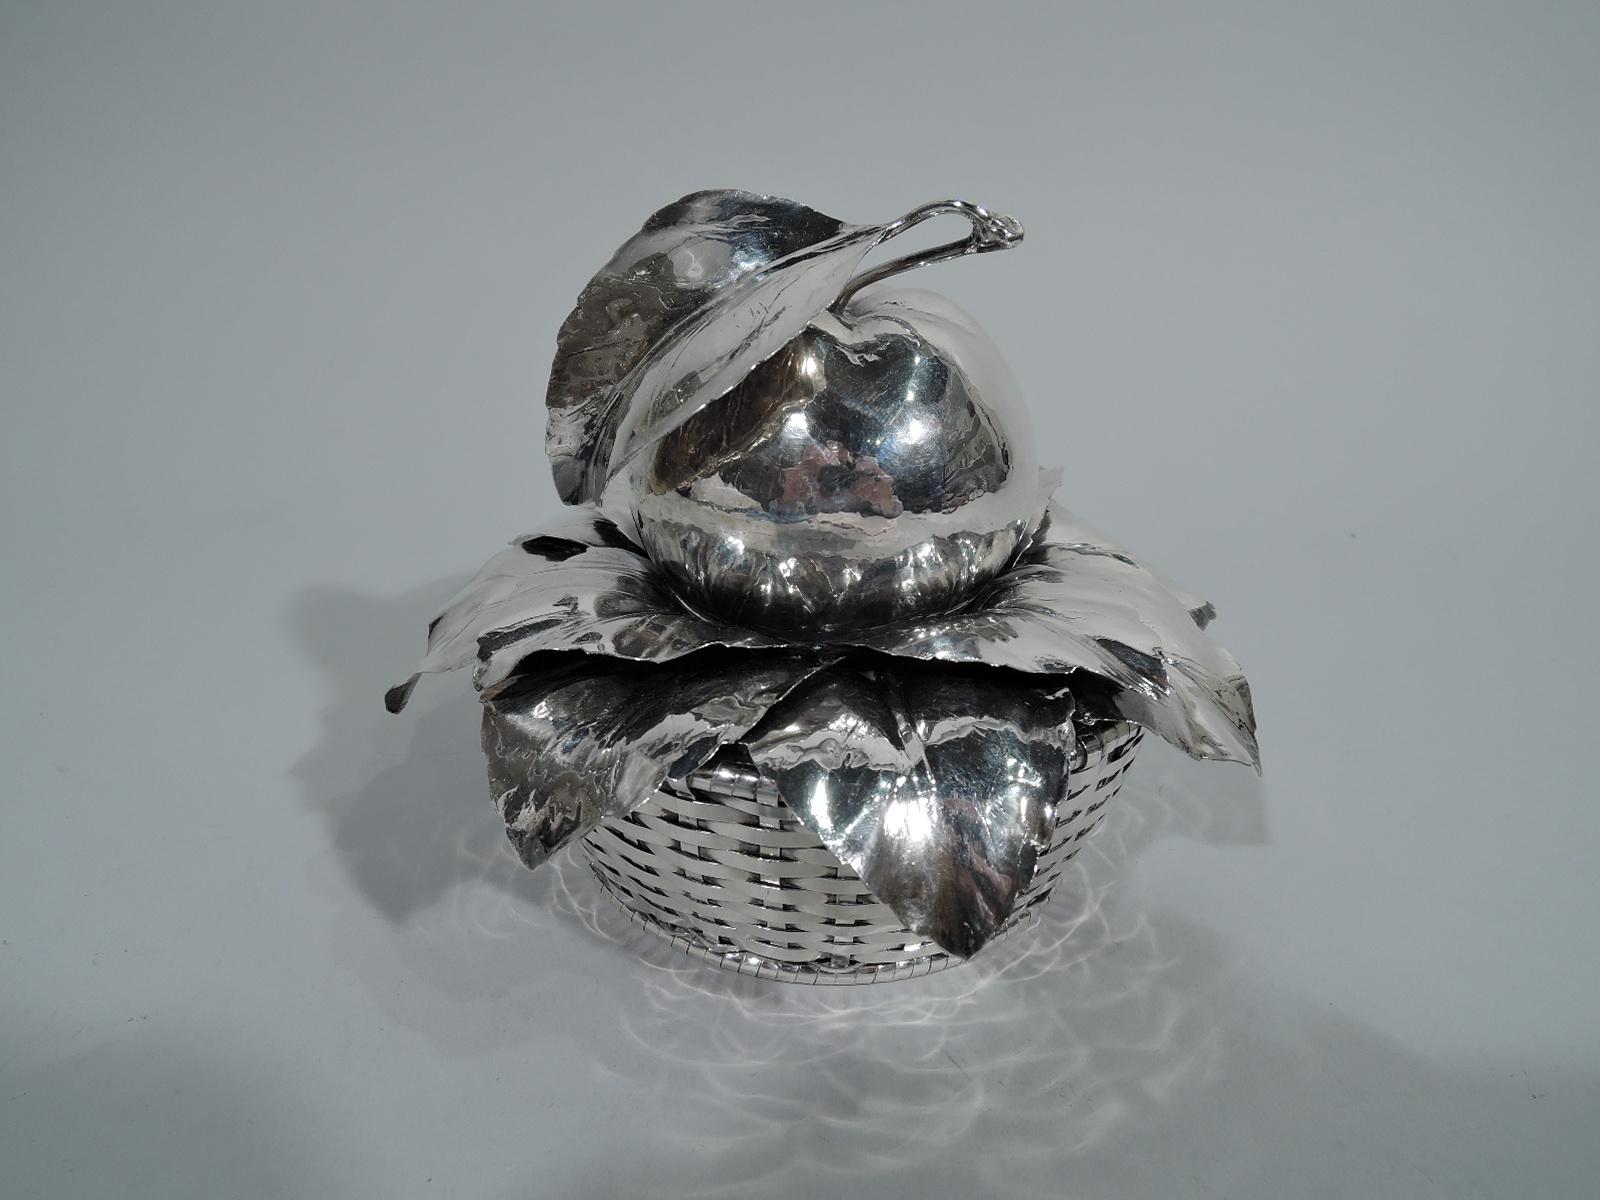 Charming sterling silver basket. Made by Buccellati in Milan. Solid well and open woven sides. Cover in form of overlapping leaves mounted to open circular frame. Oversized apple finial – a realistic fruit with leafy stem. Hallmark (1968 to